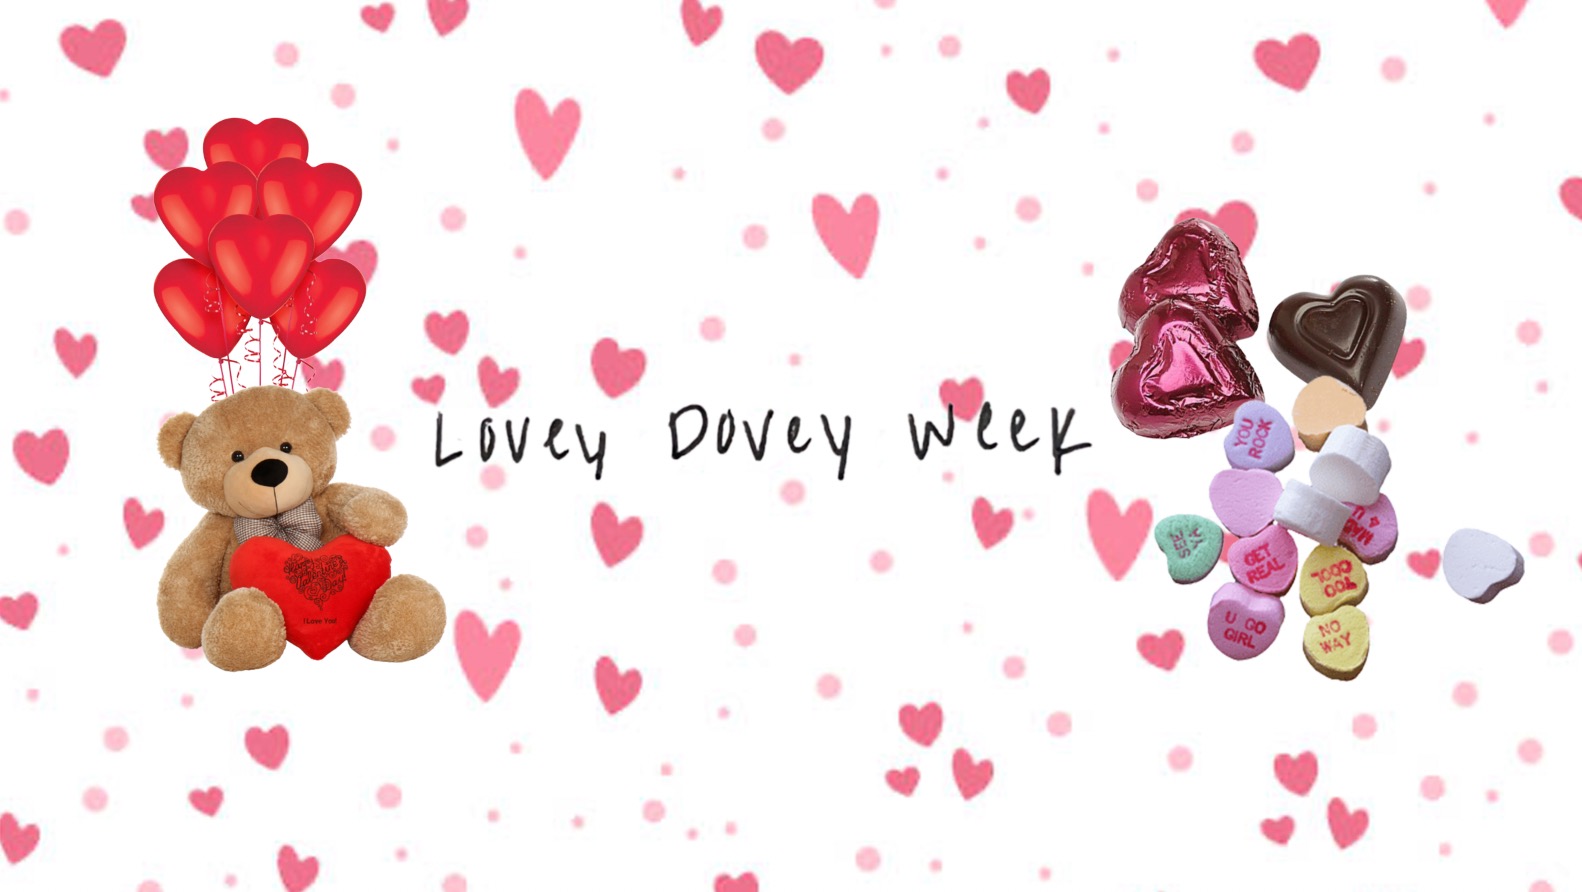 Heart background with a stuffed bear, candy hearts and "lovey dovey week" in the center.